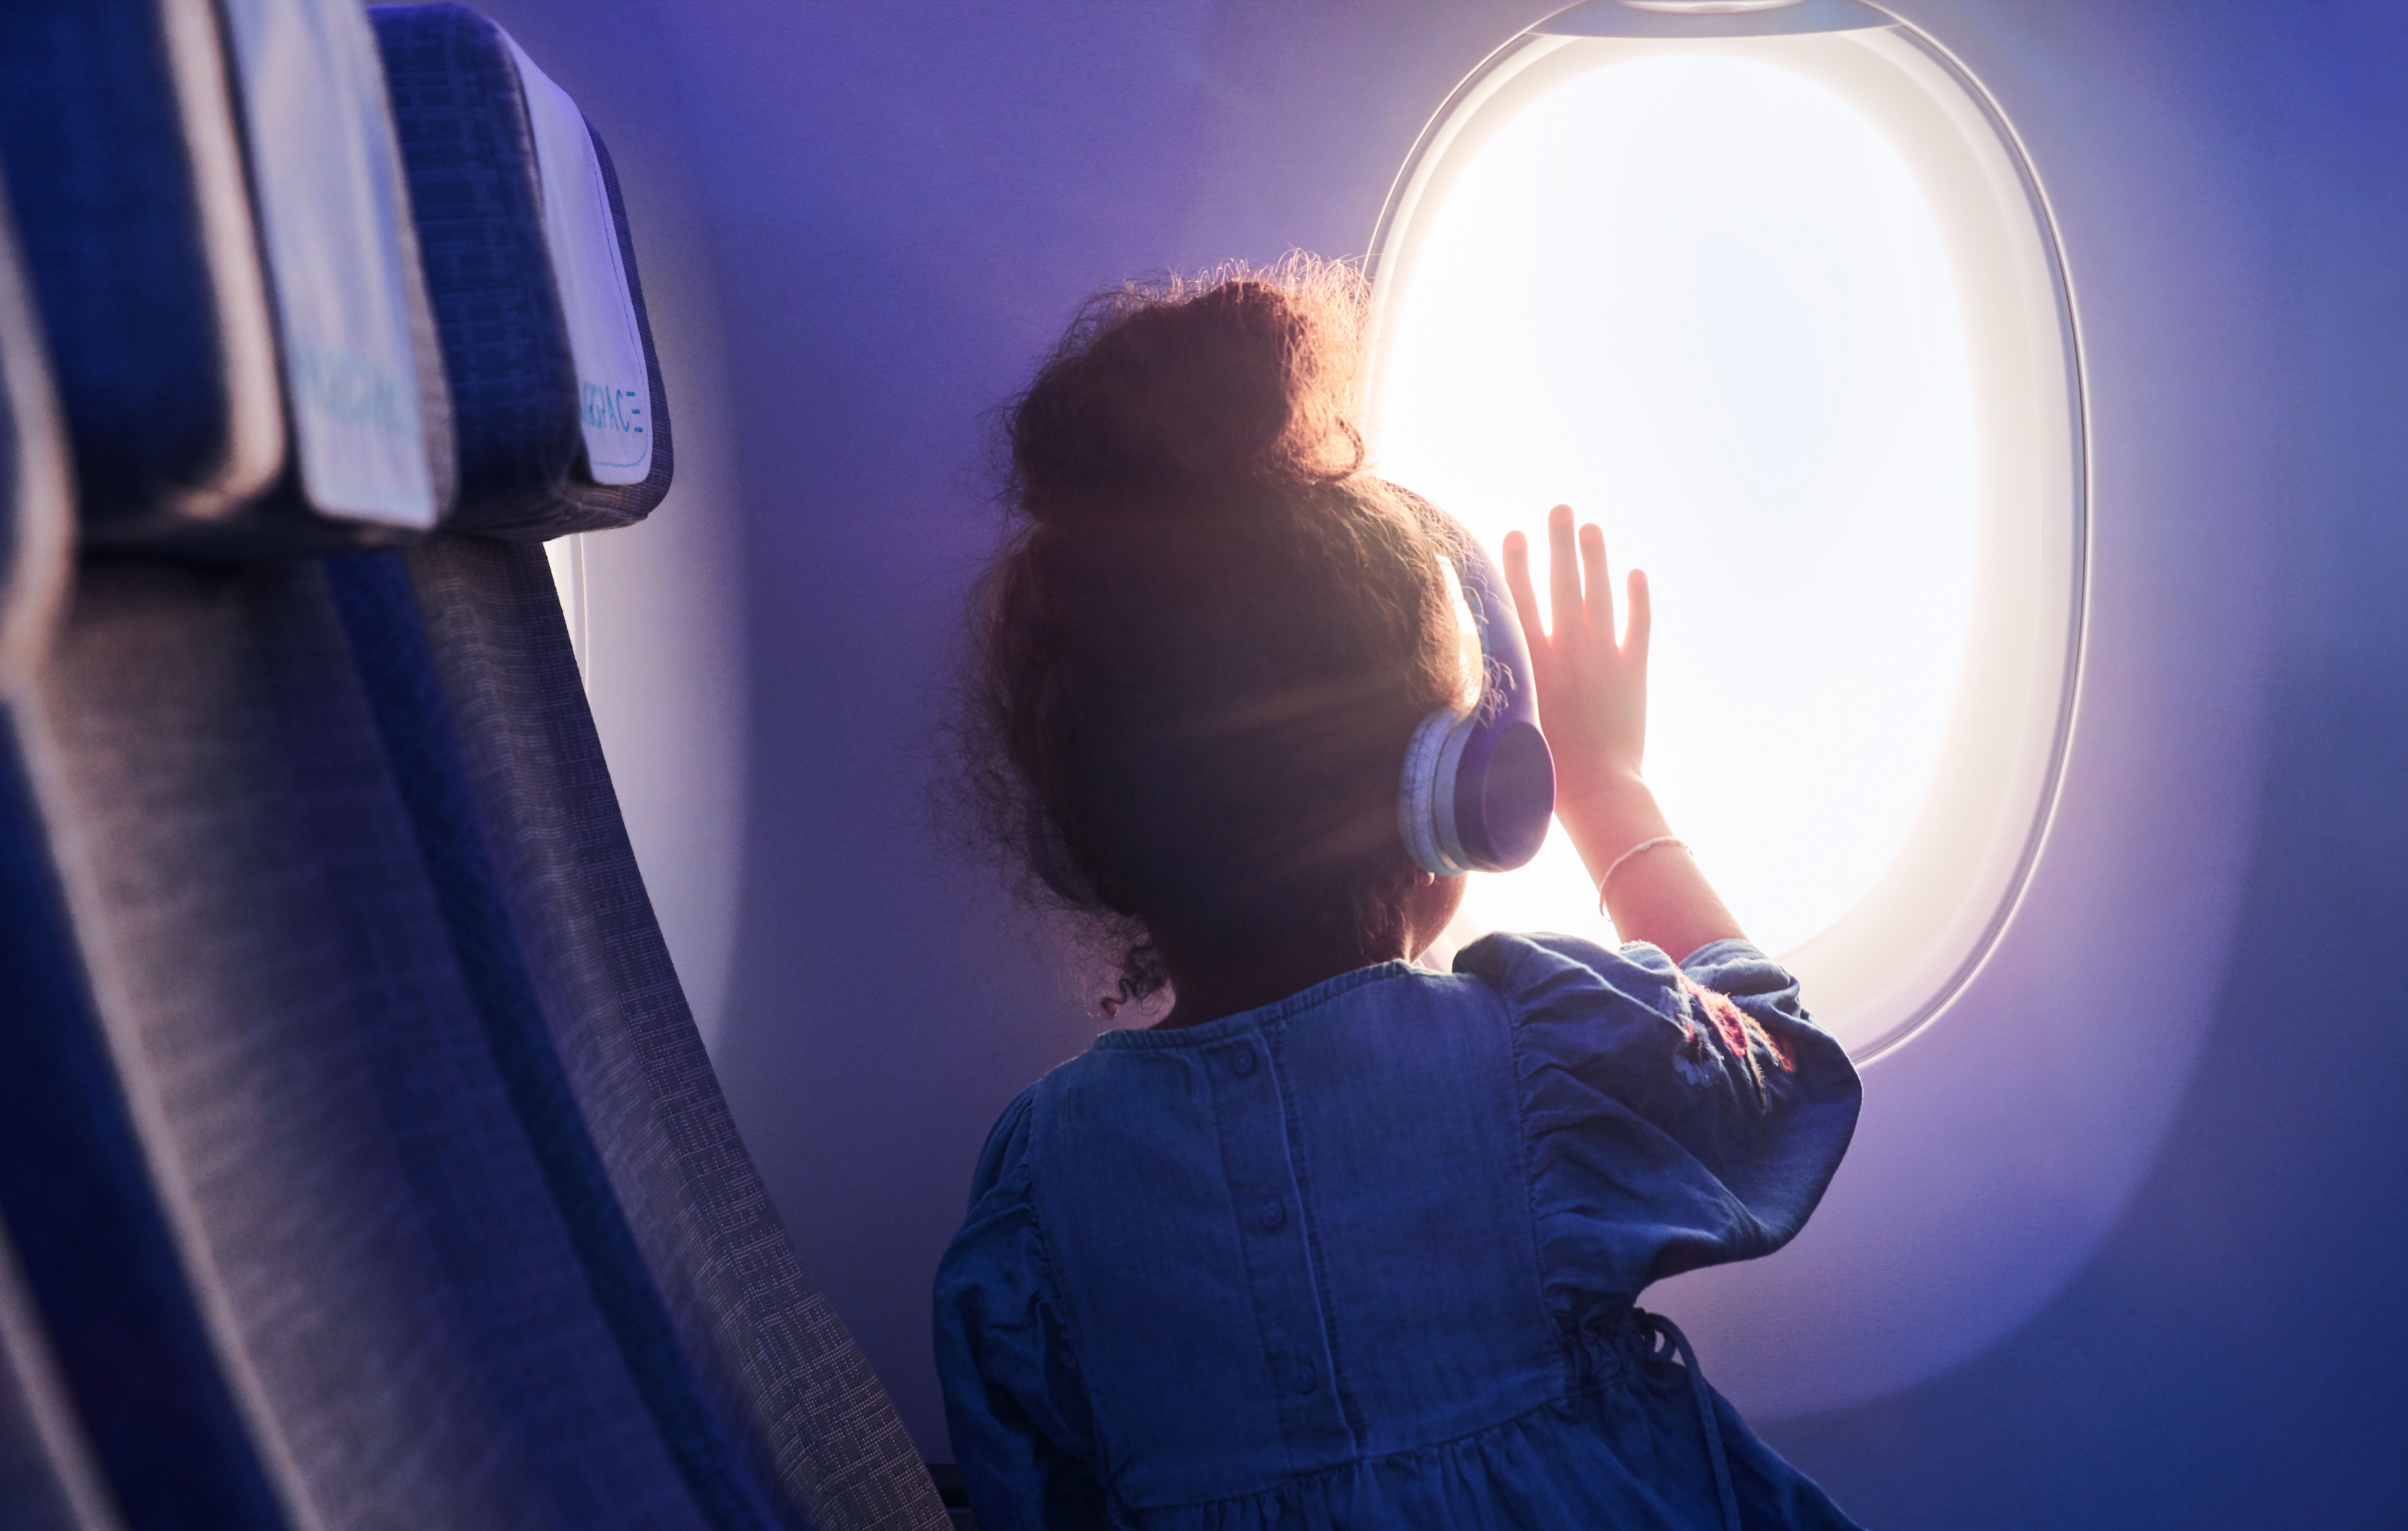 A child looking out an aircraft window wearing headphones.